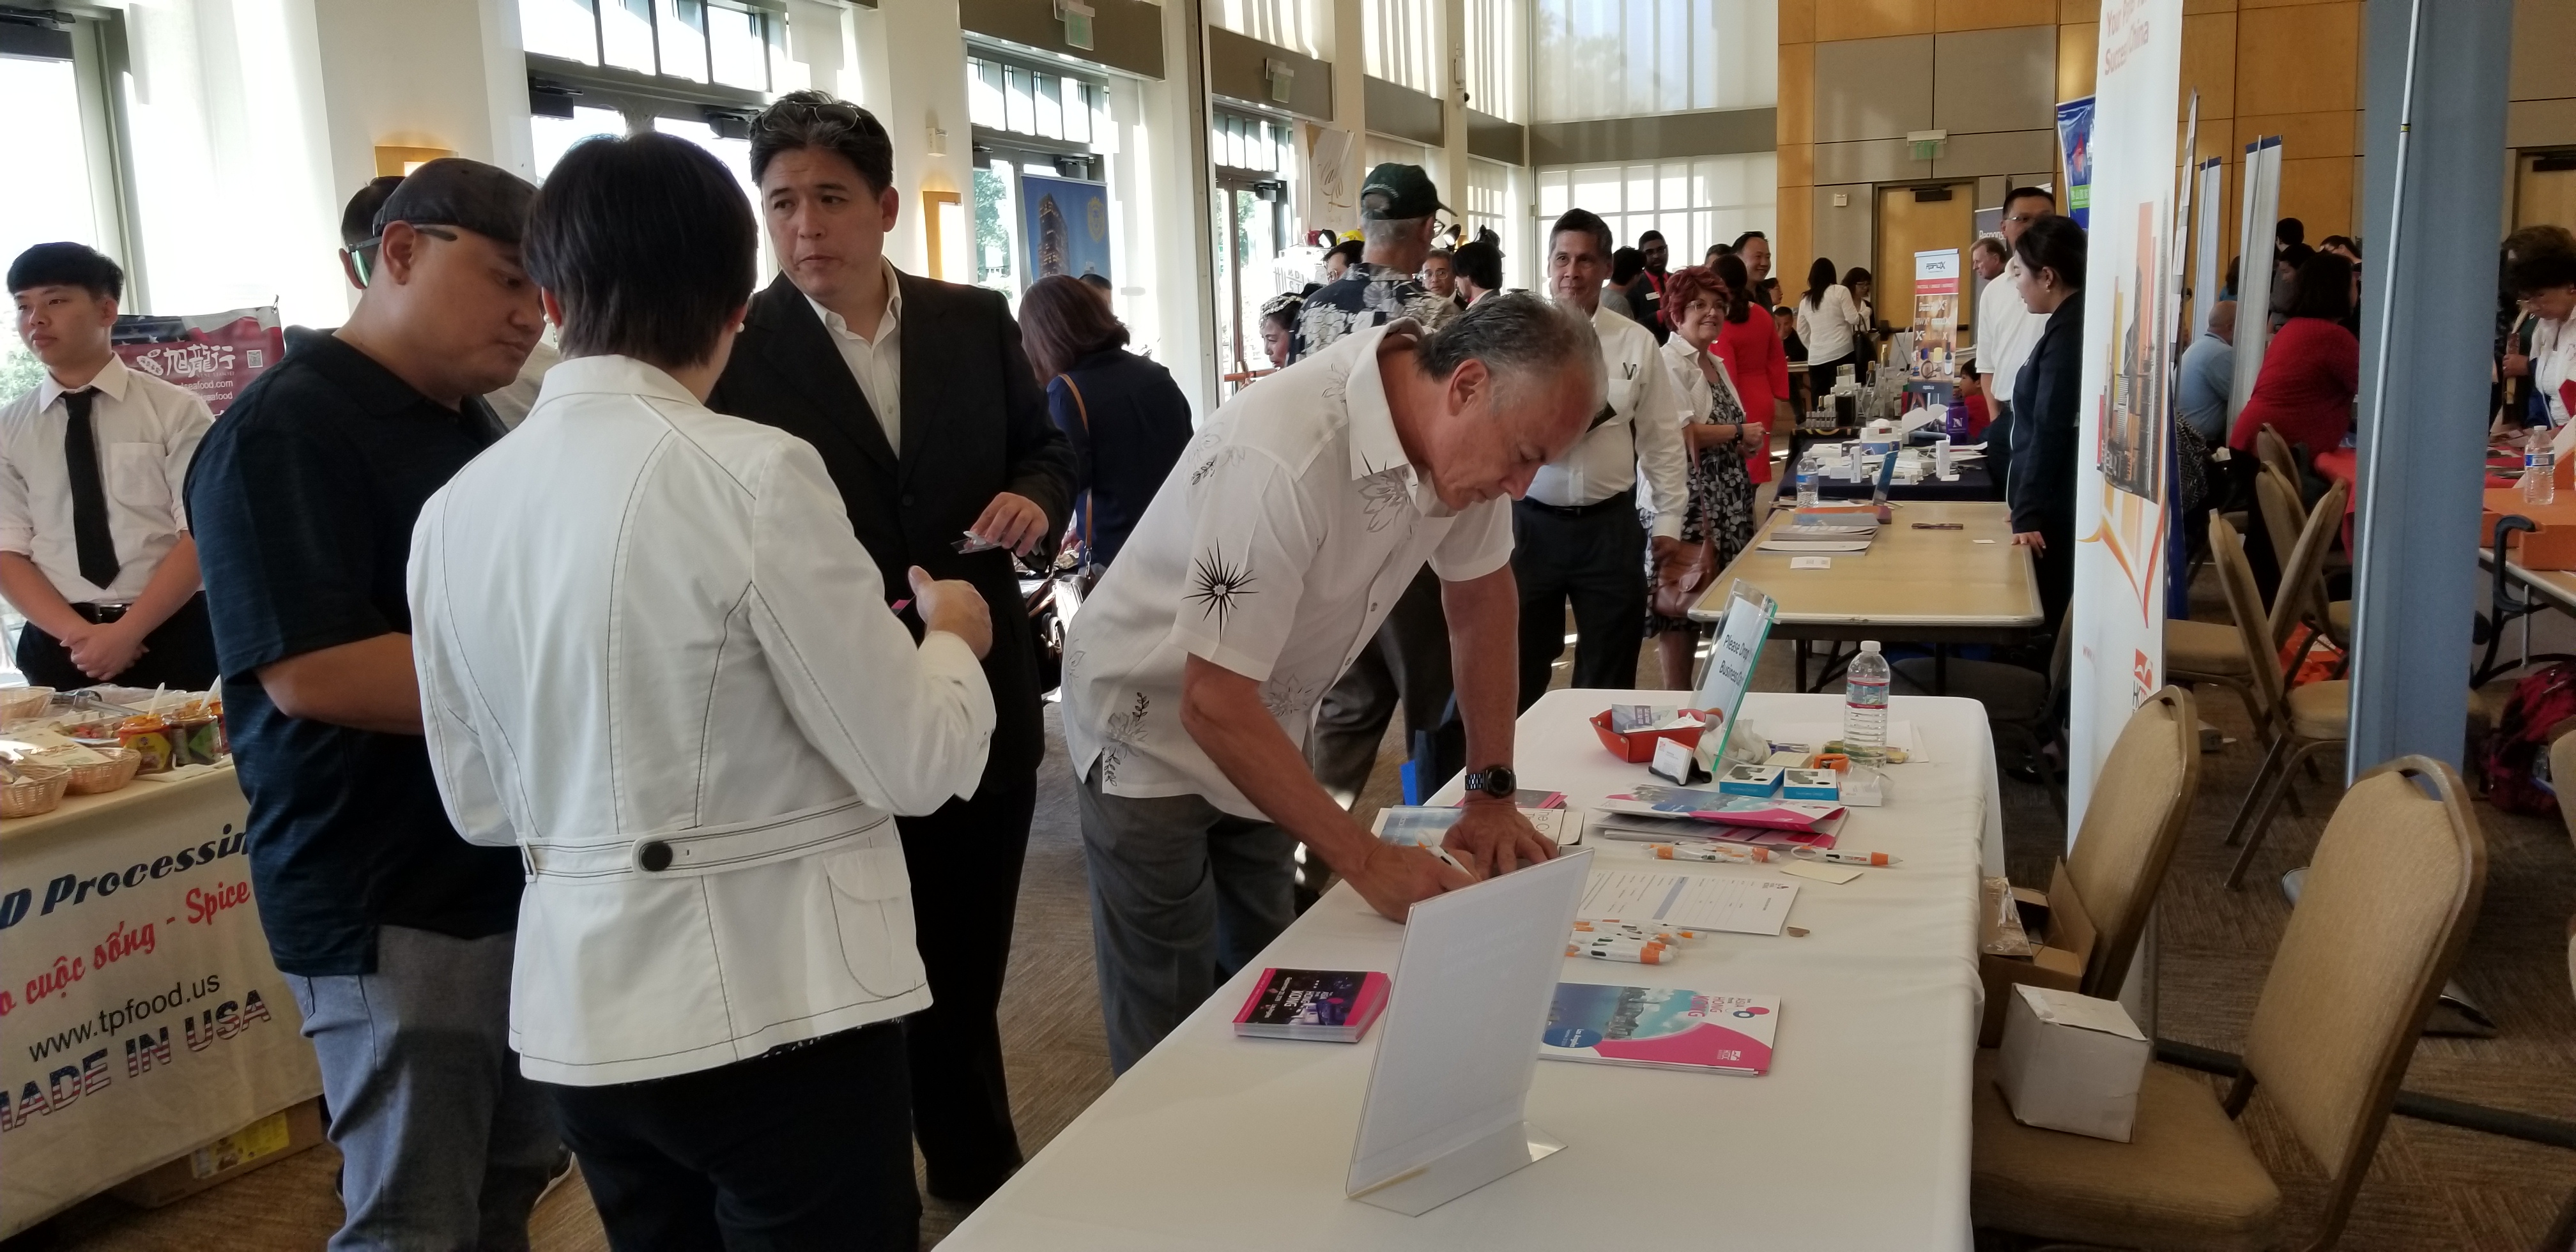 June 12, 2019 – Asian Industry Business Expo 2019